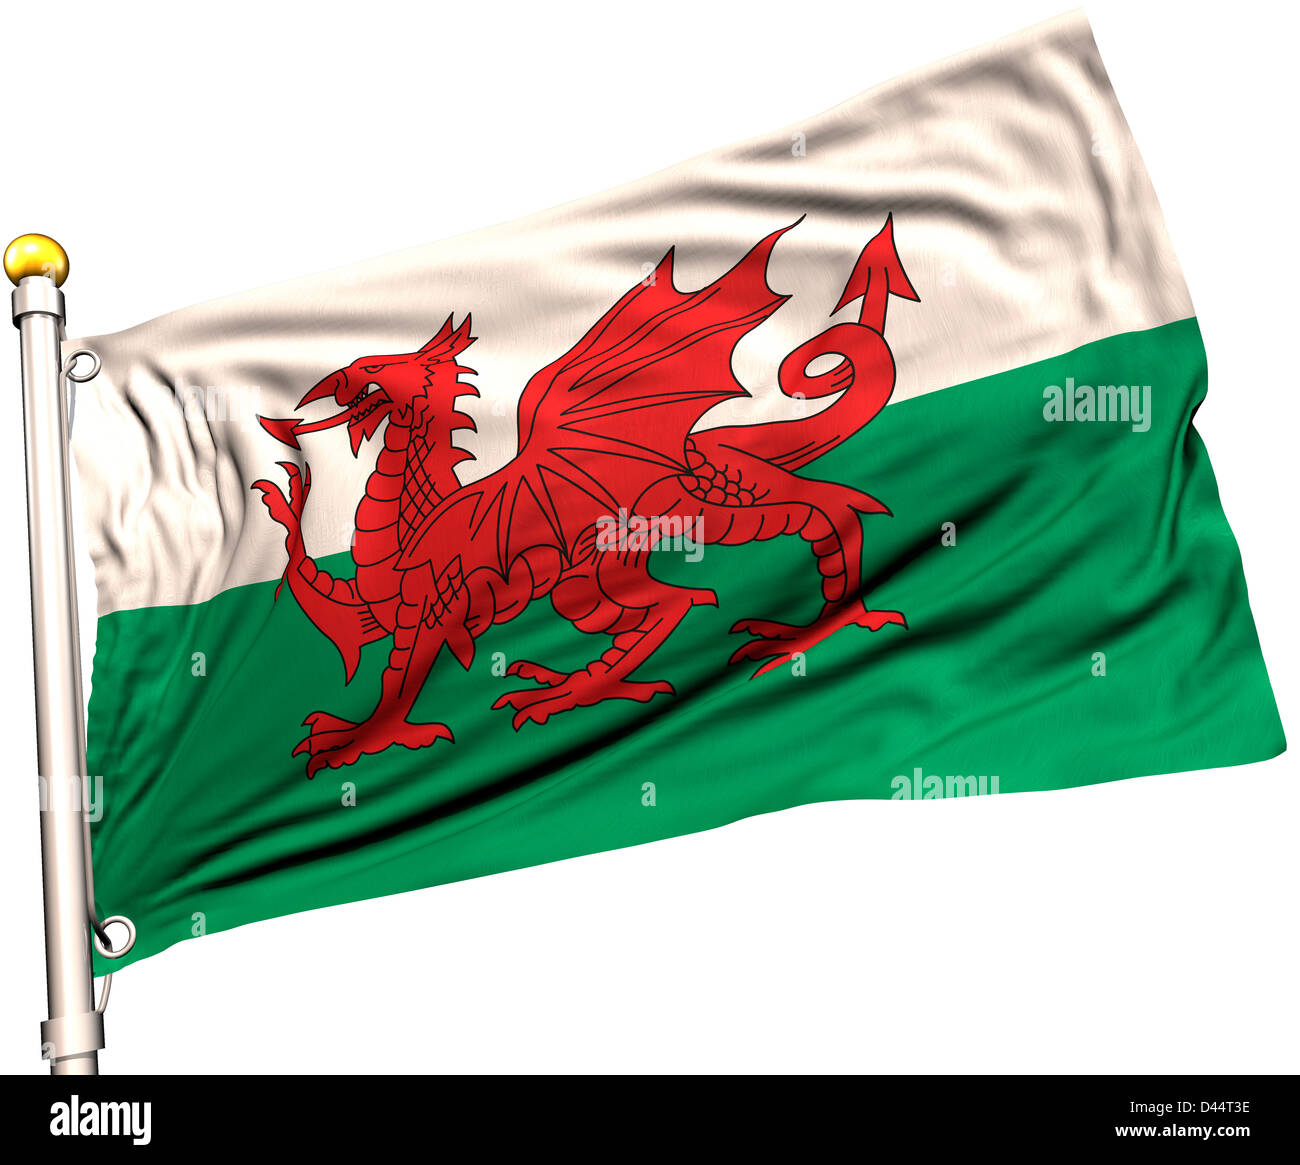 Wales flag on a flag pole. Clipping path included. Silk texture visible on the flag at 100%. Stock Photo